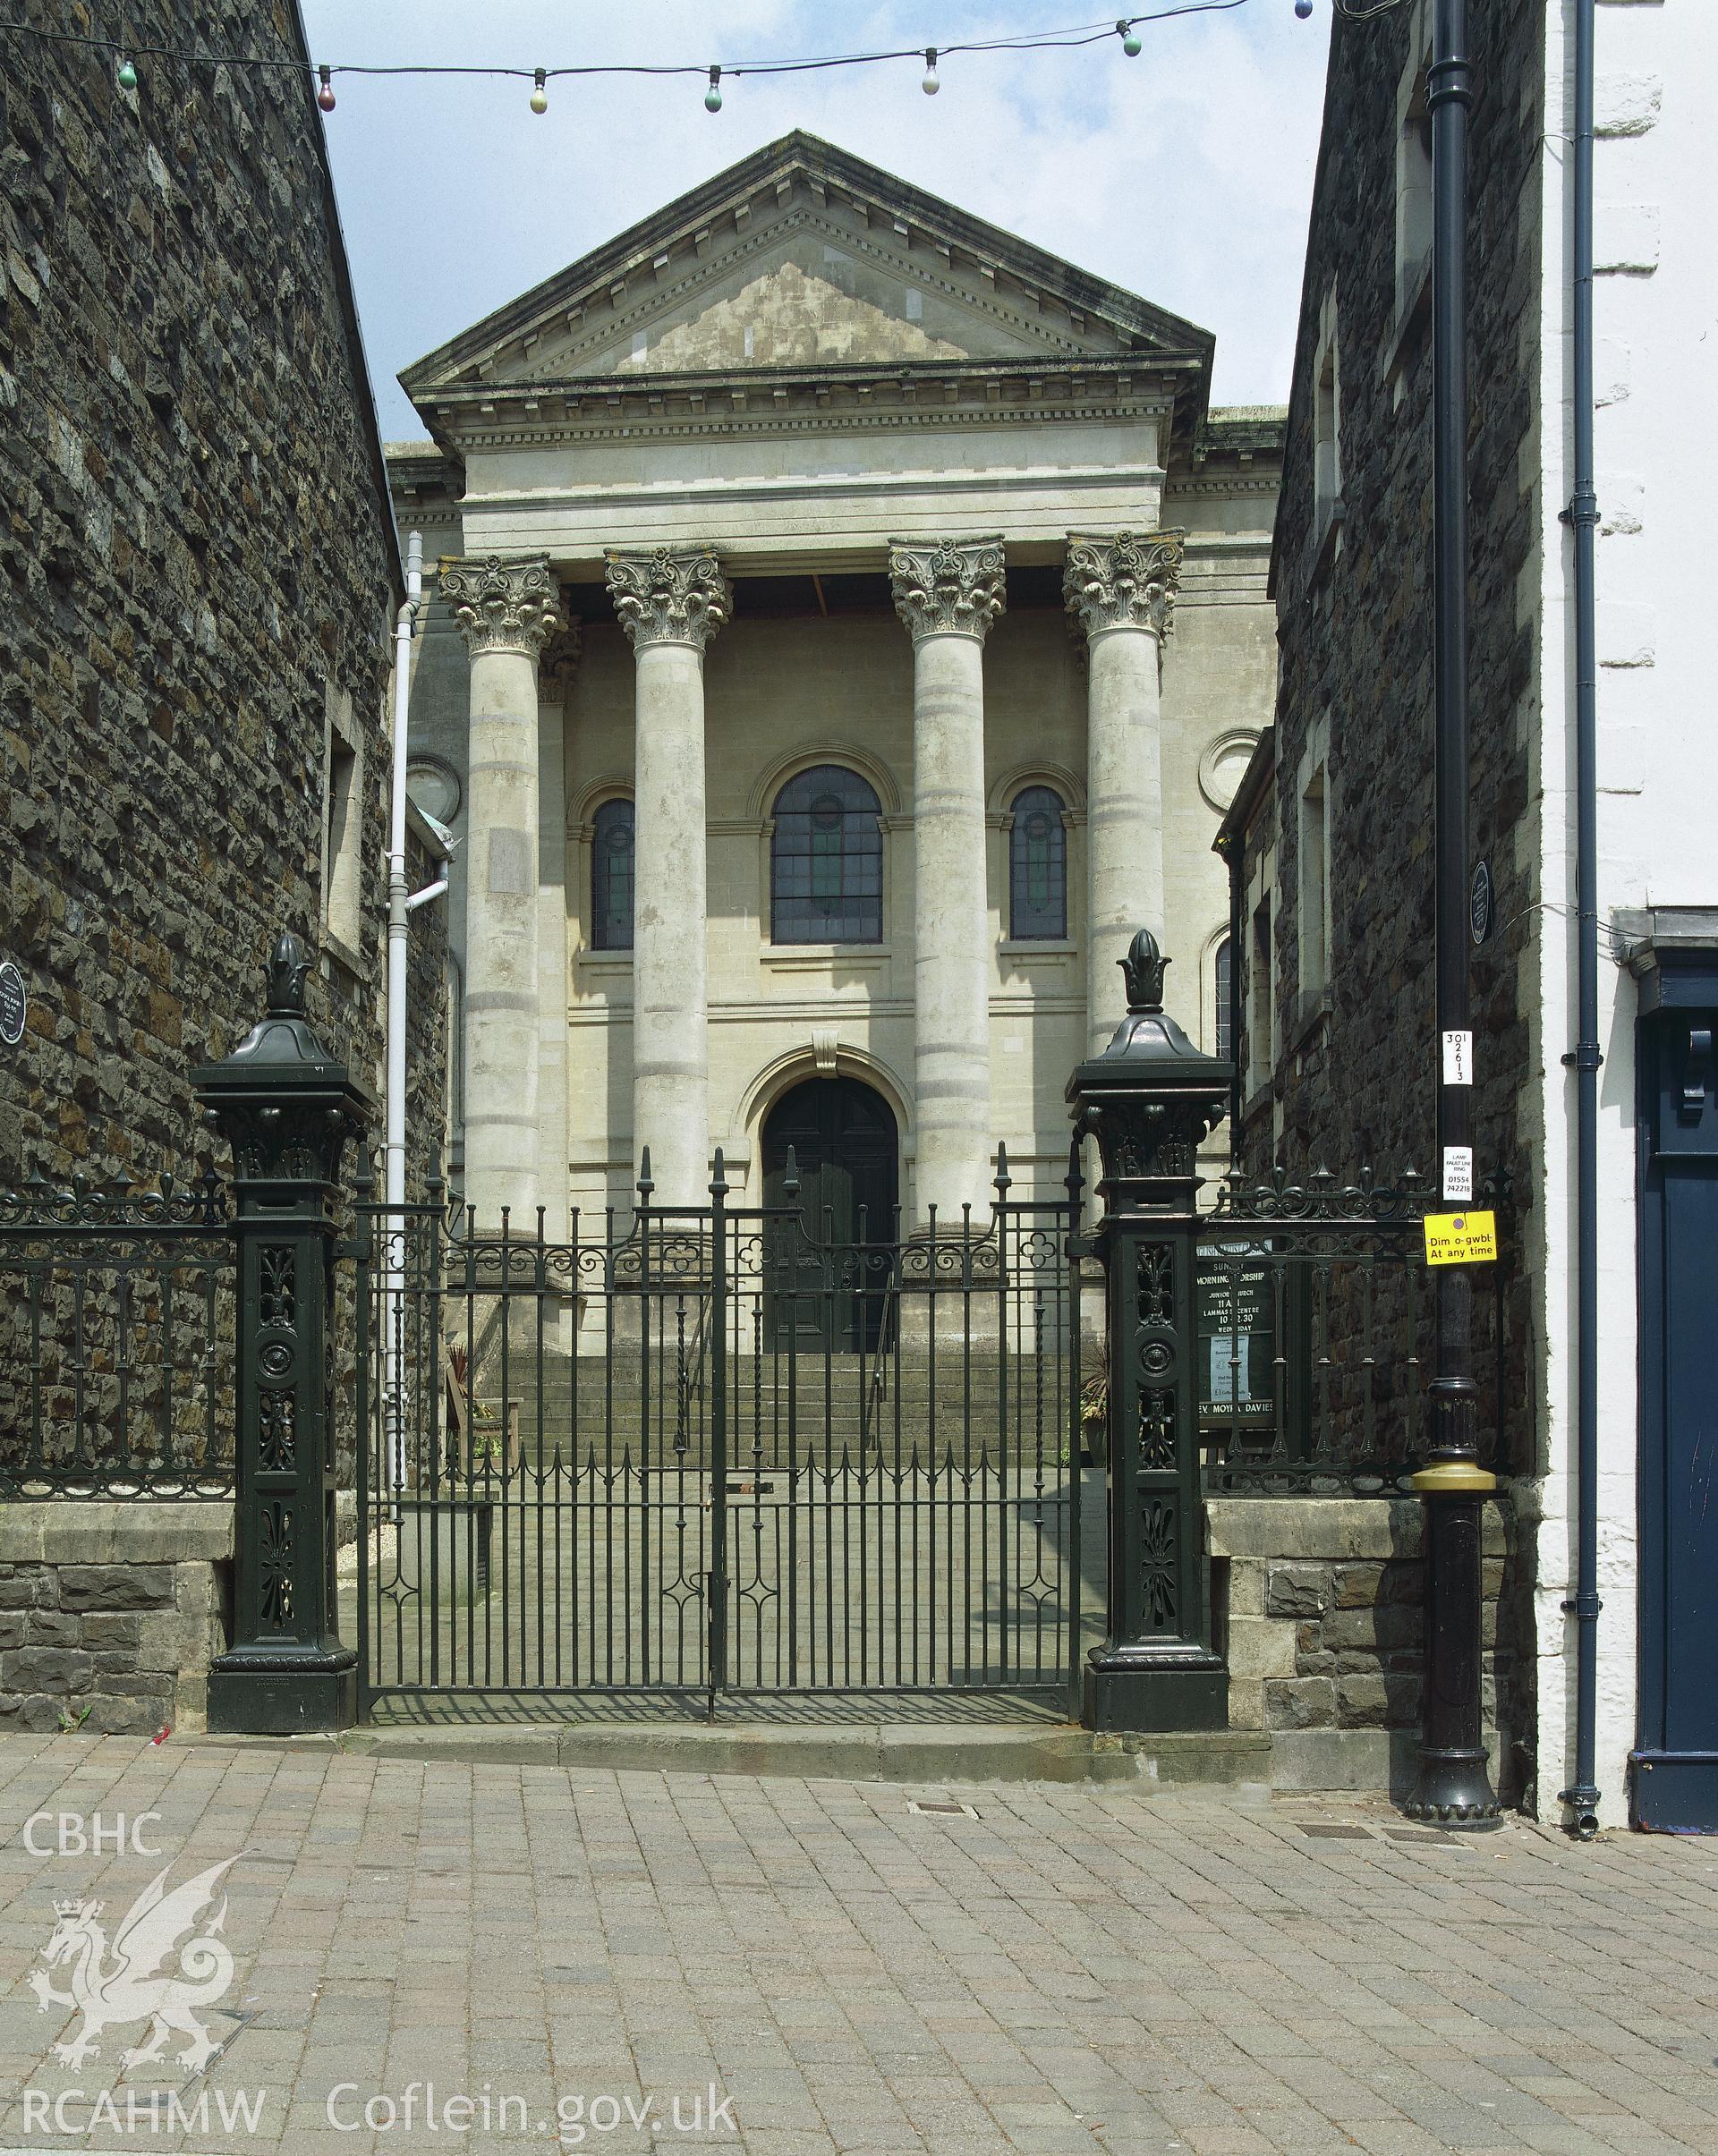 RCAHMW colour transparency showing an exterior view of English Baptist Chapel, Carmarthen